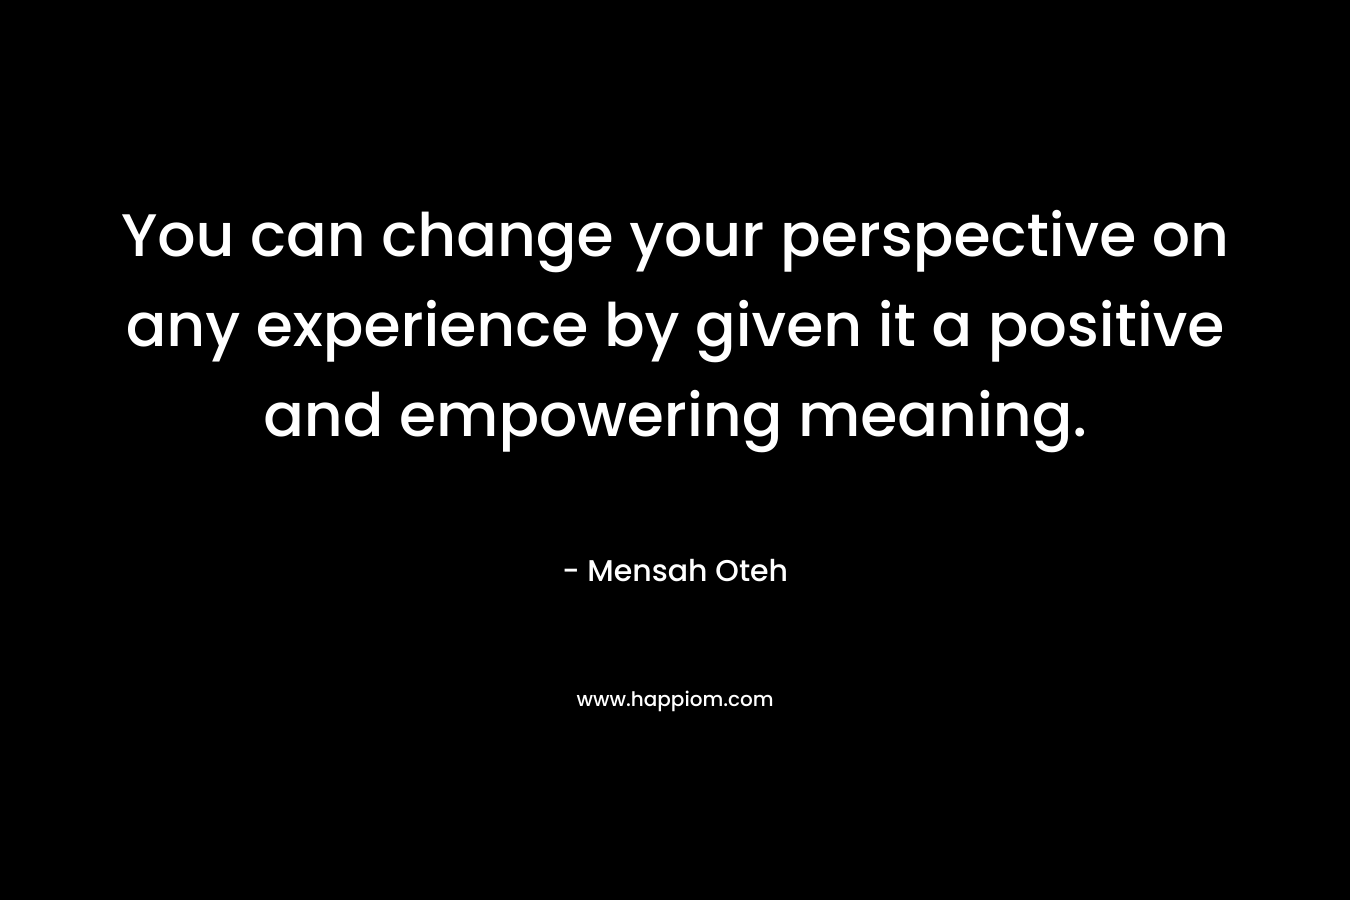 You can change your perspective on any experience by given it a positive and empowering meaning.